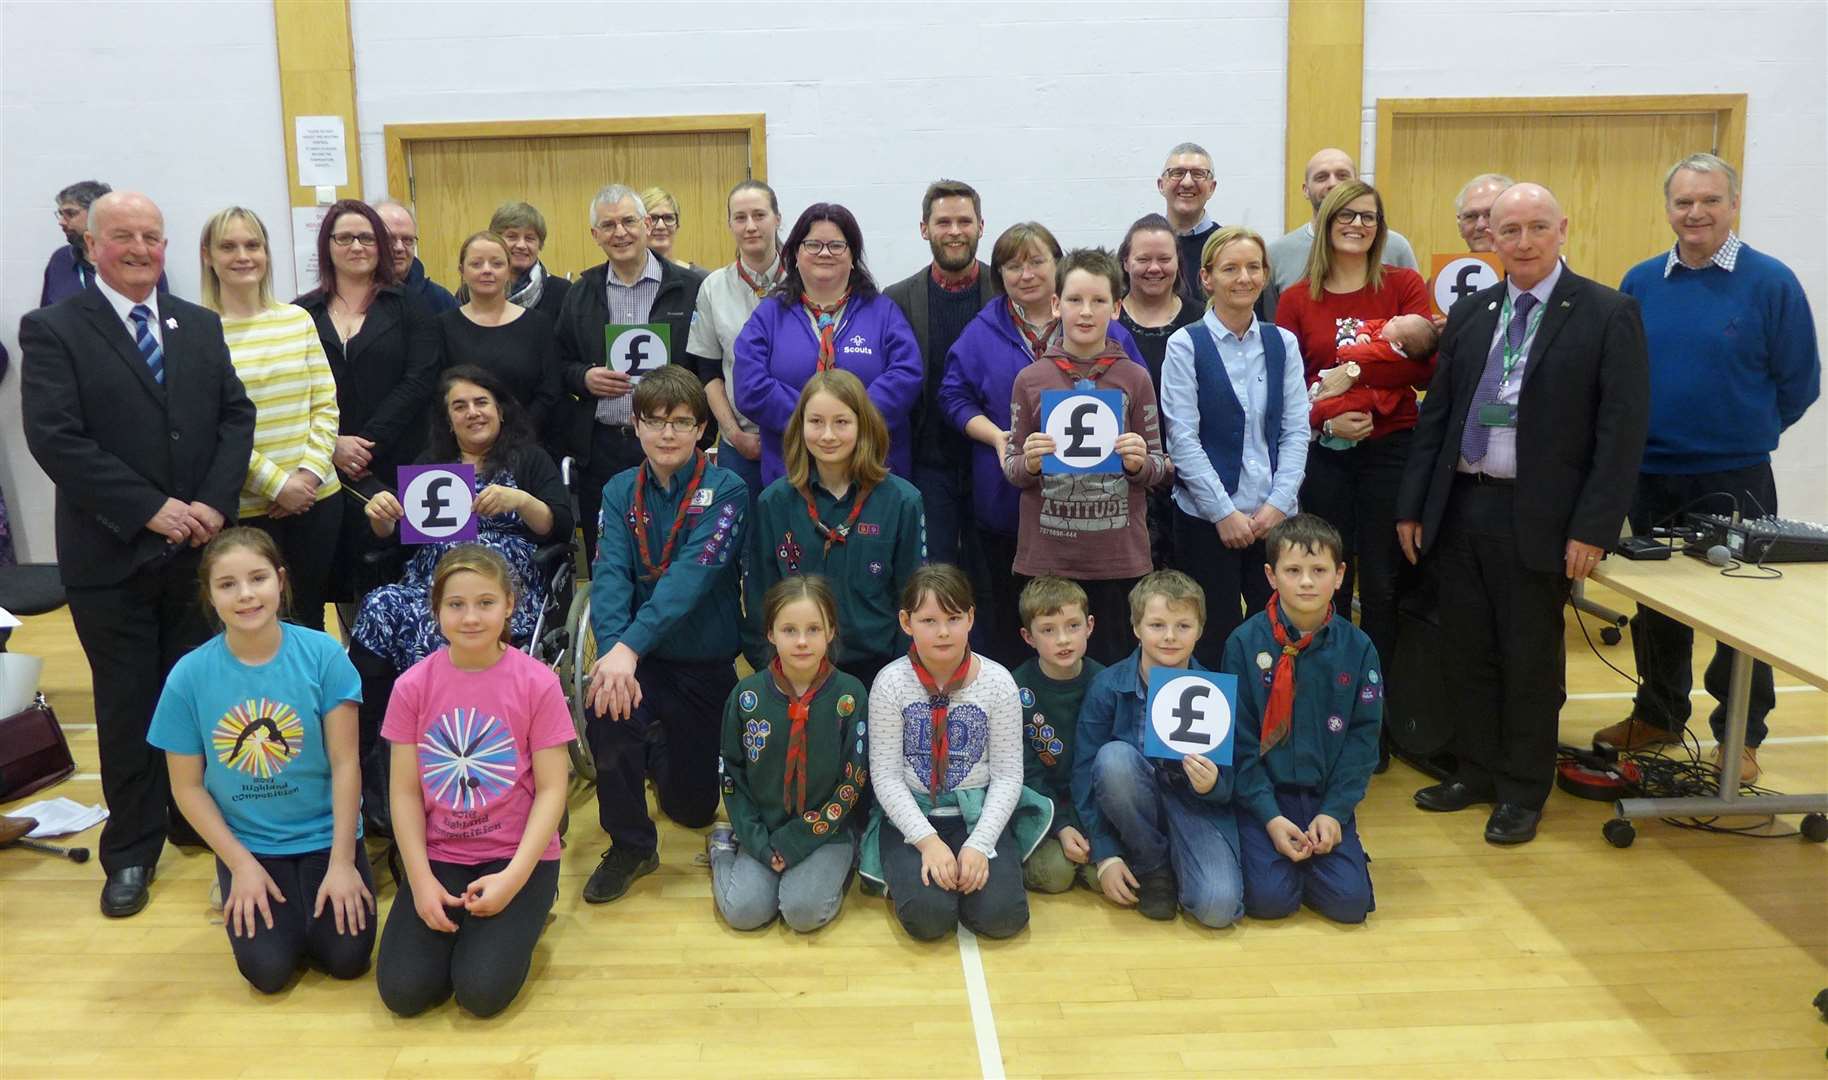 Representatives of the groups that were awarded funding at the fifth Your Cash Your Caithness held in the Pulteney Centre, Wick, in January 2019, along with Councillor Willie Mackay, chief executive Donna Manson and ward manager Alex Macmanus.